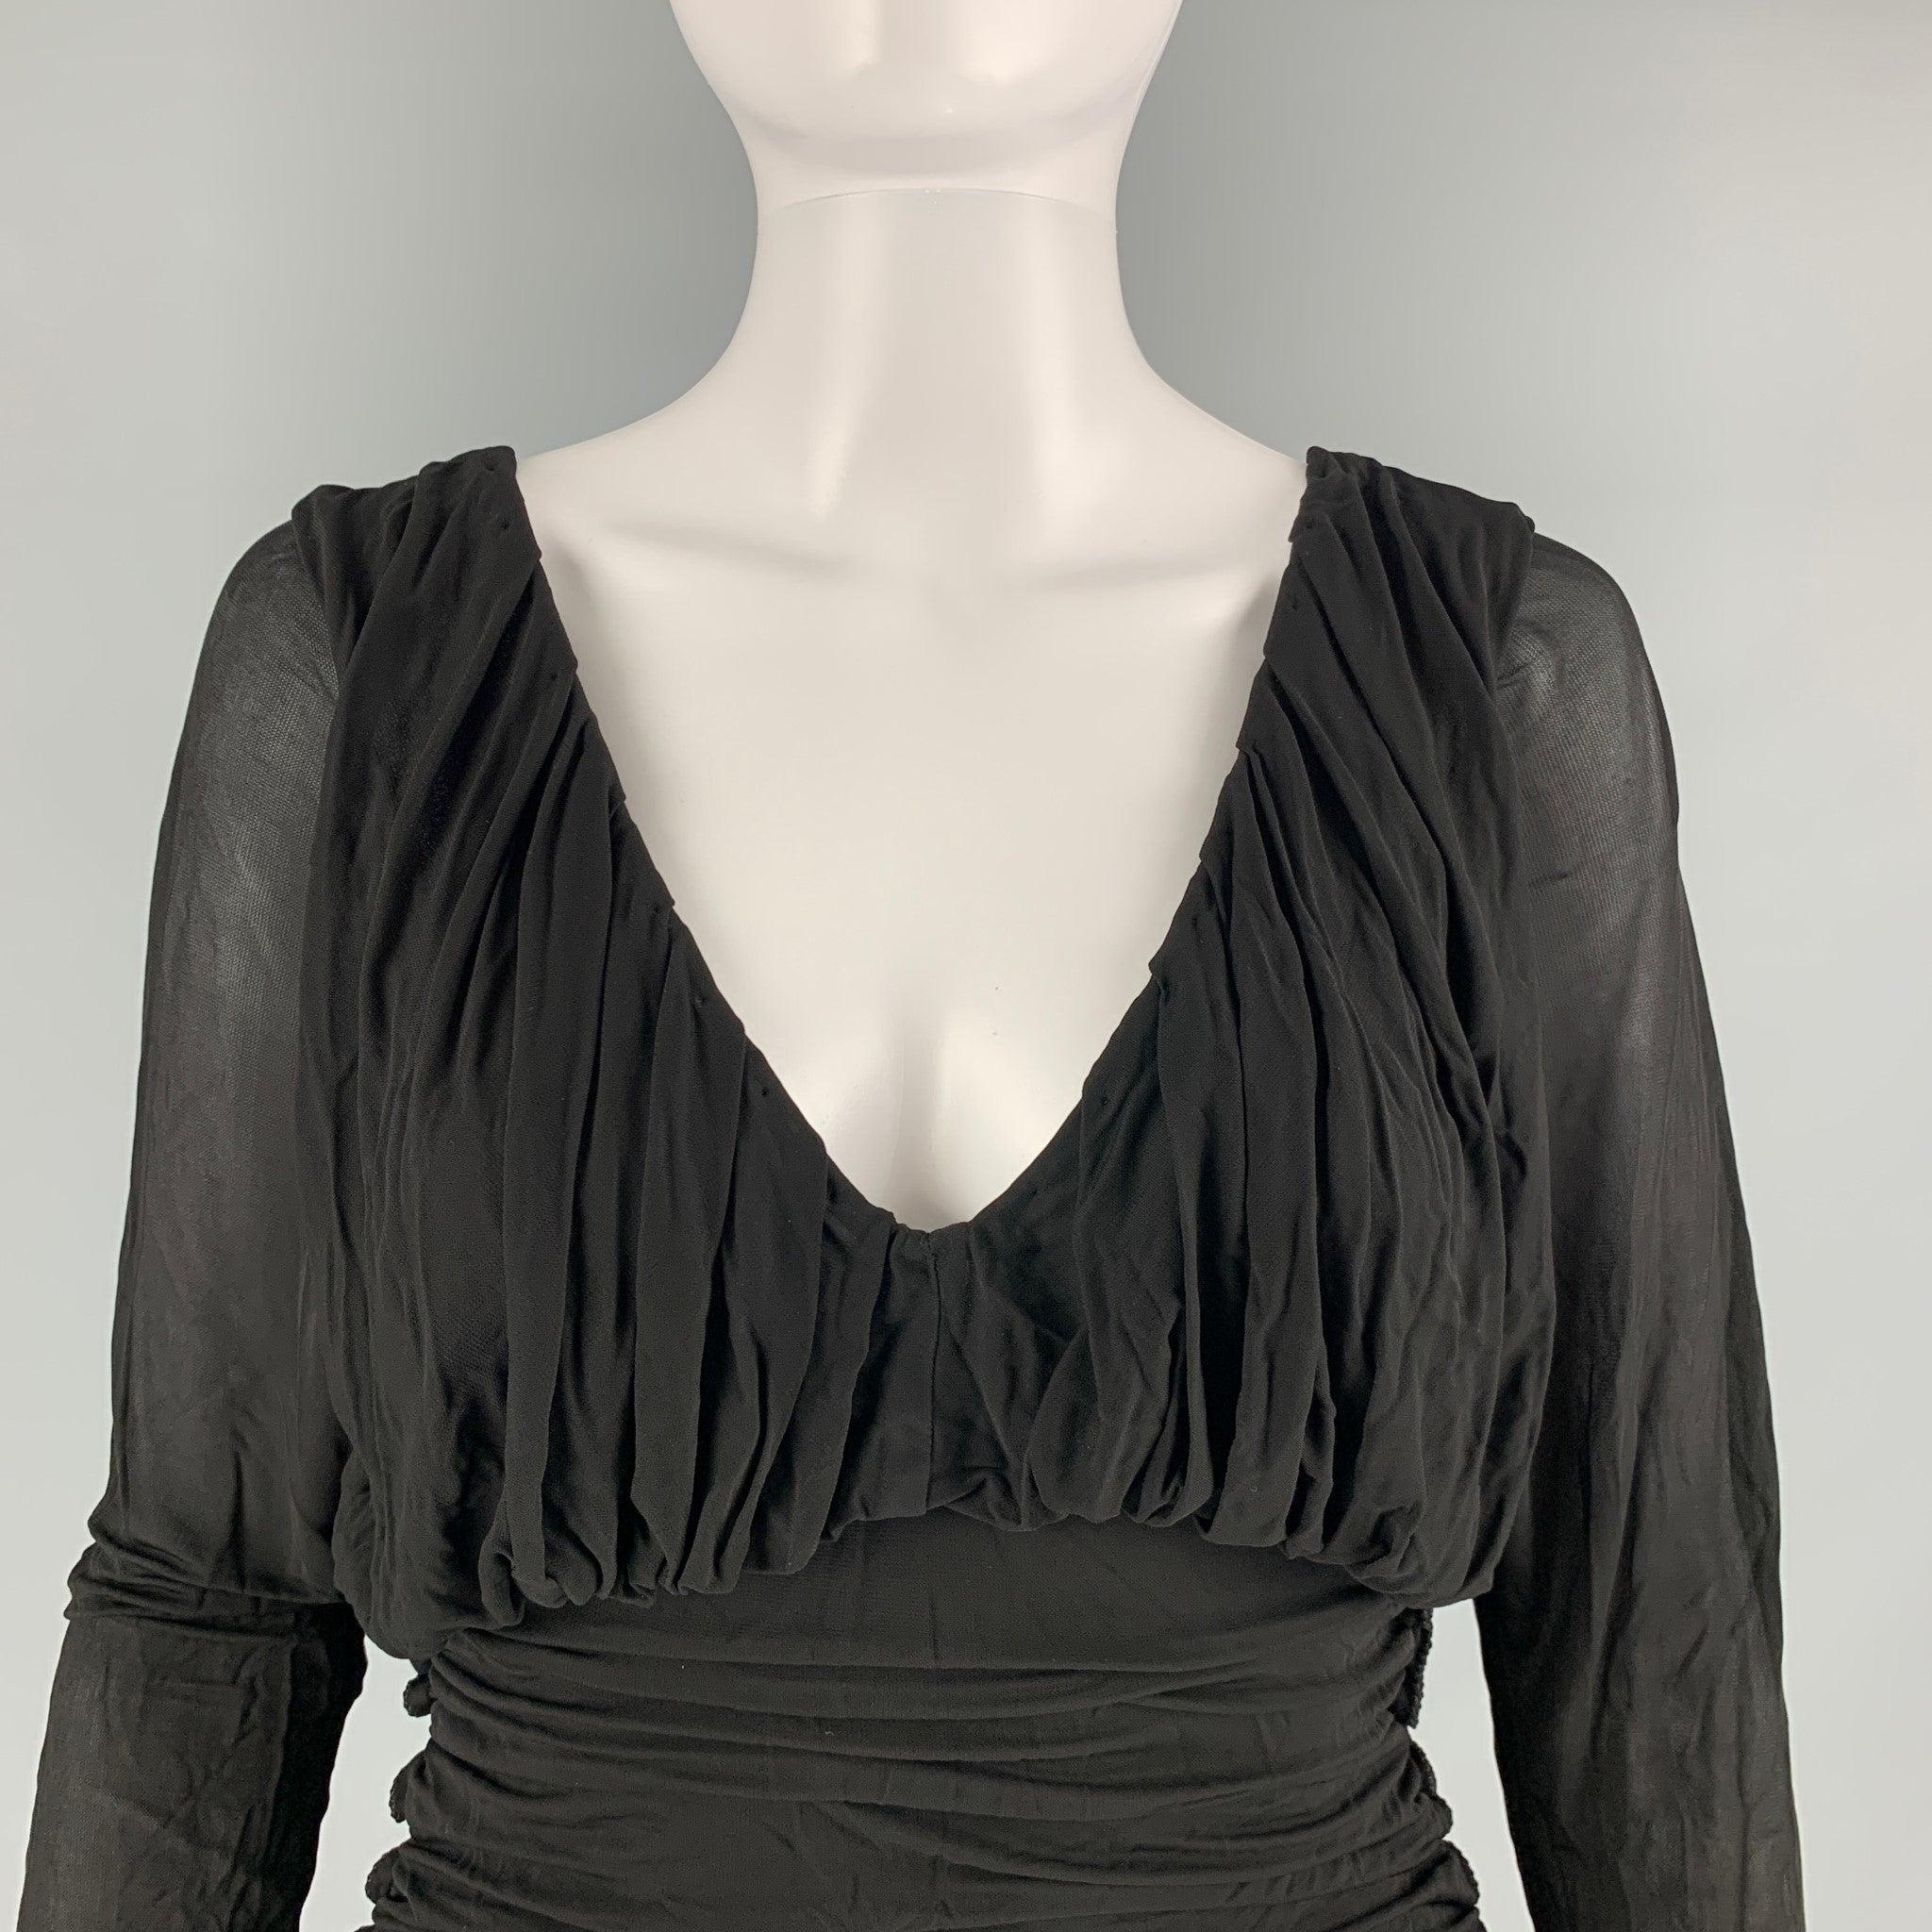 SAINT LAURENT cocktail dress comes in a black cupro material featuring long sleeve, ruched style, and an open back. New with Tags. 

Marked:  34 

Measurements: 
 
Shoulder: 16 inches Bust: 30 inches Waist: 22 inches Hip: 34 inches Sleeve: 26 inches